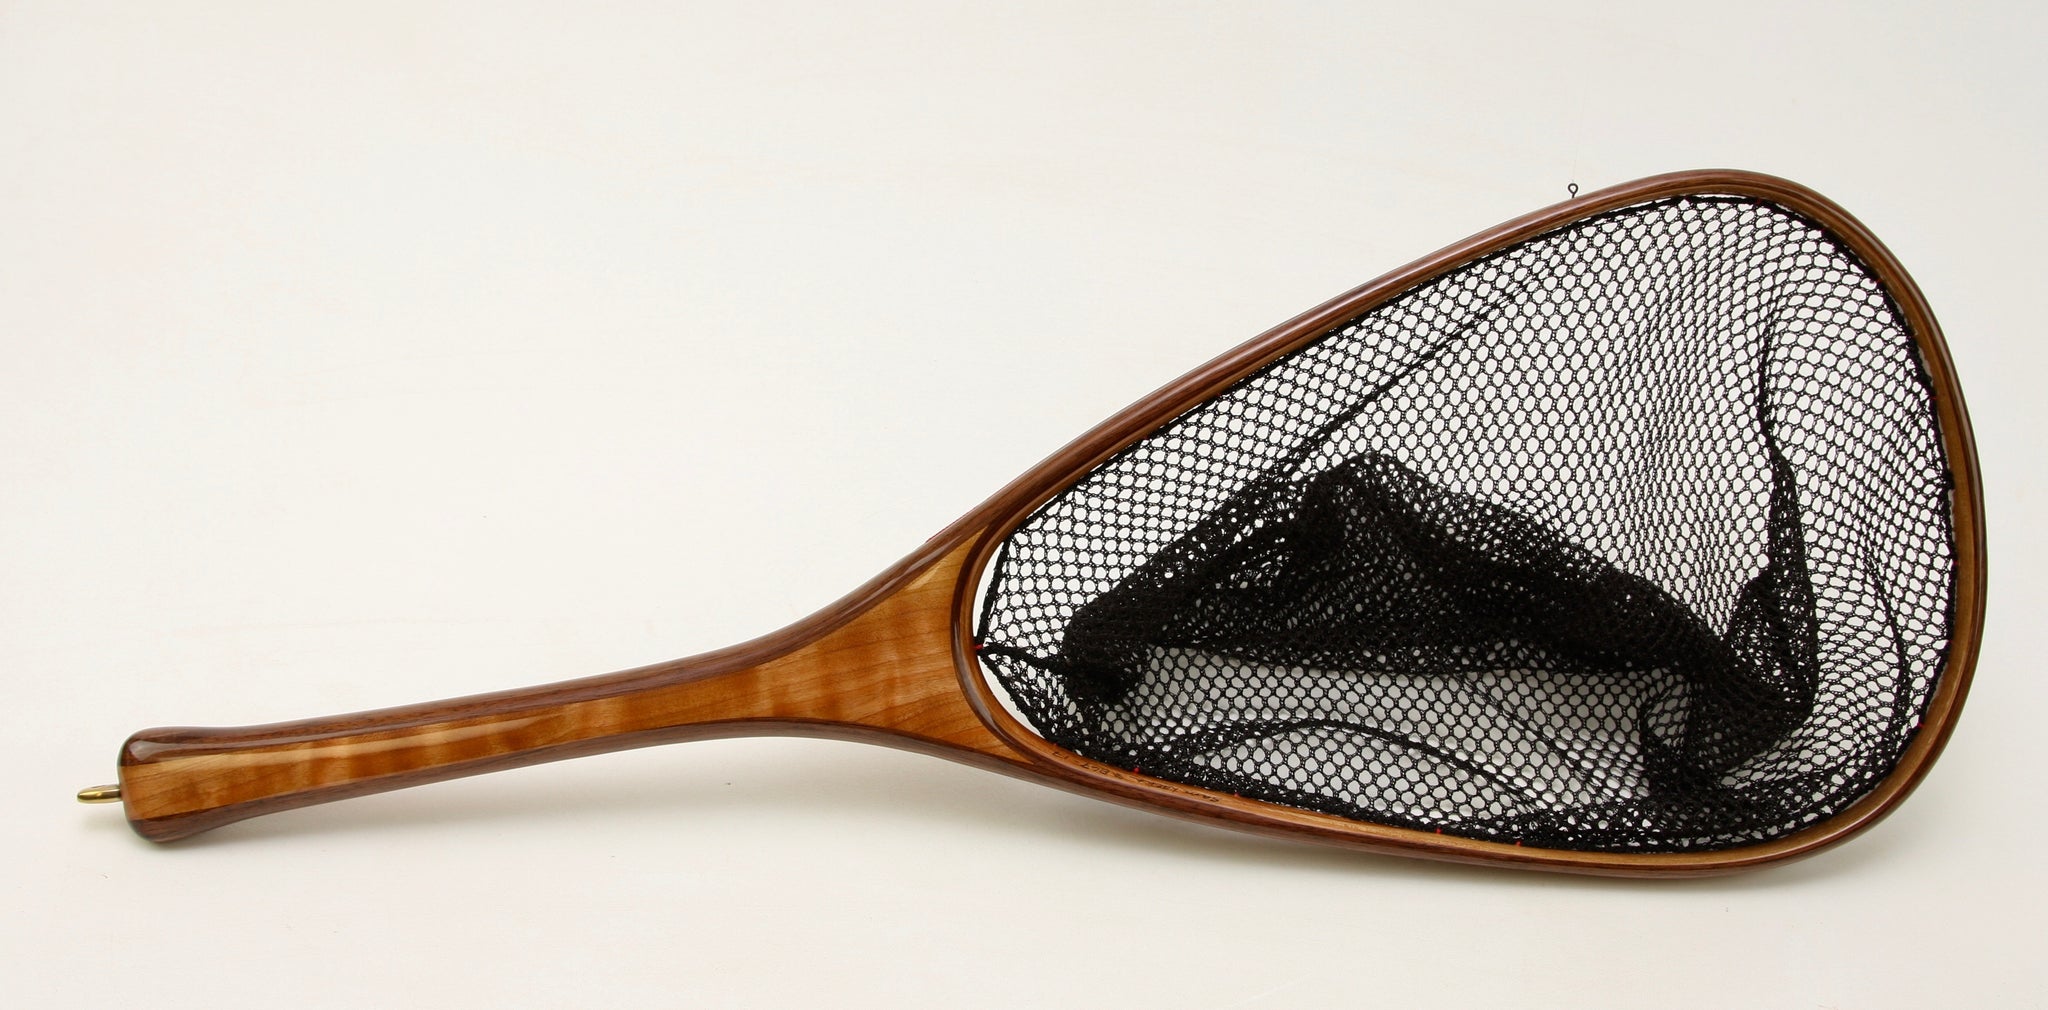 Medium sized Fly Fishing Net in Curly Cherry and Walnut - Nets